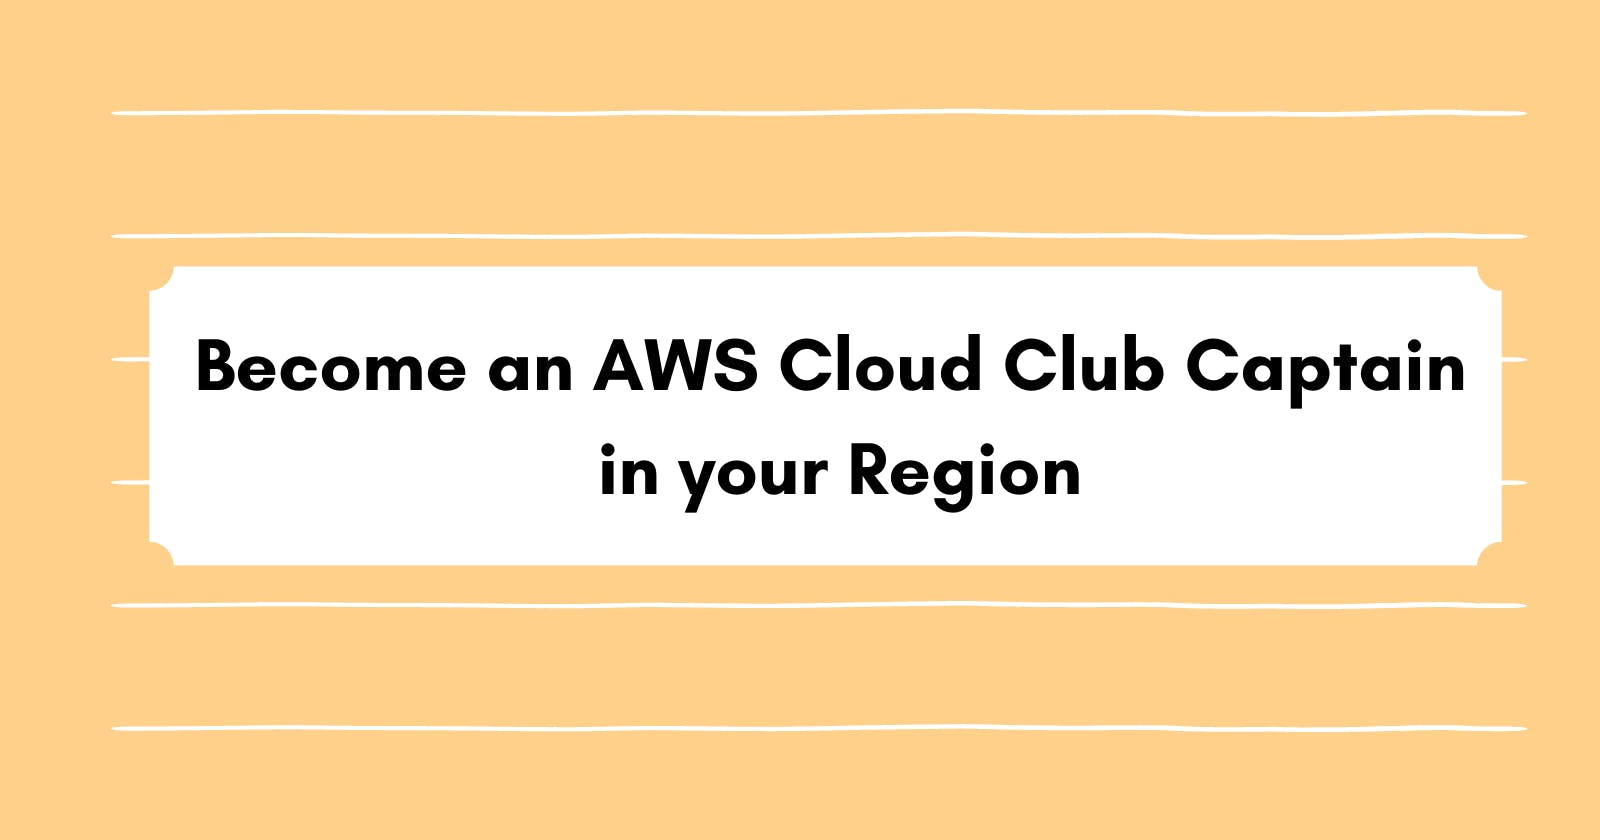 Become an AWS Cloud Club Captain in your Region